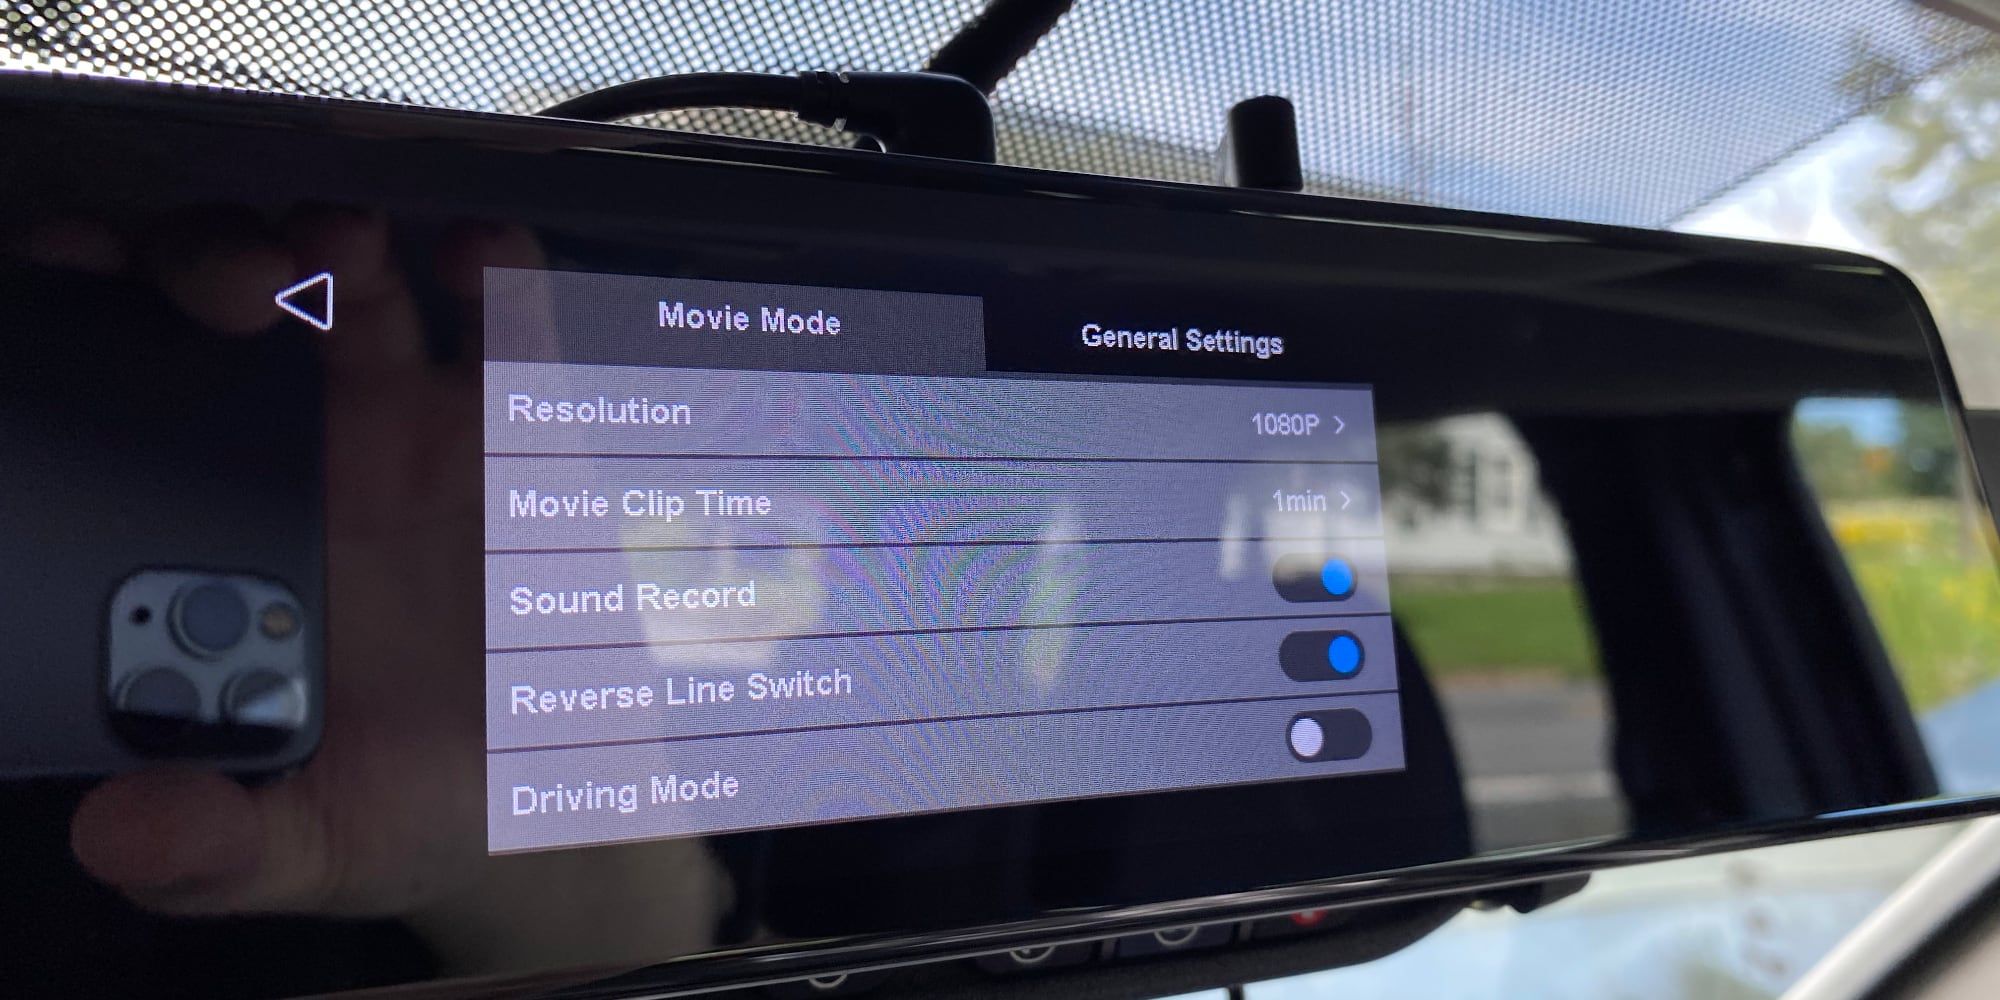 auto vox rear view camera not working